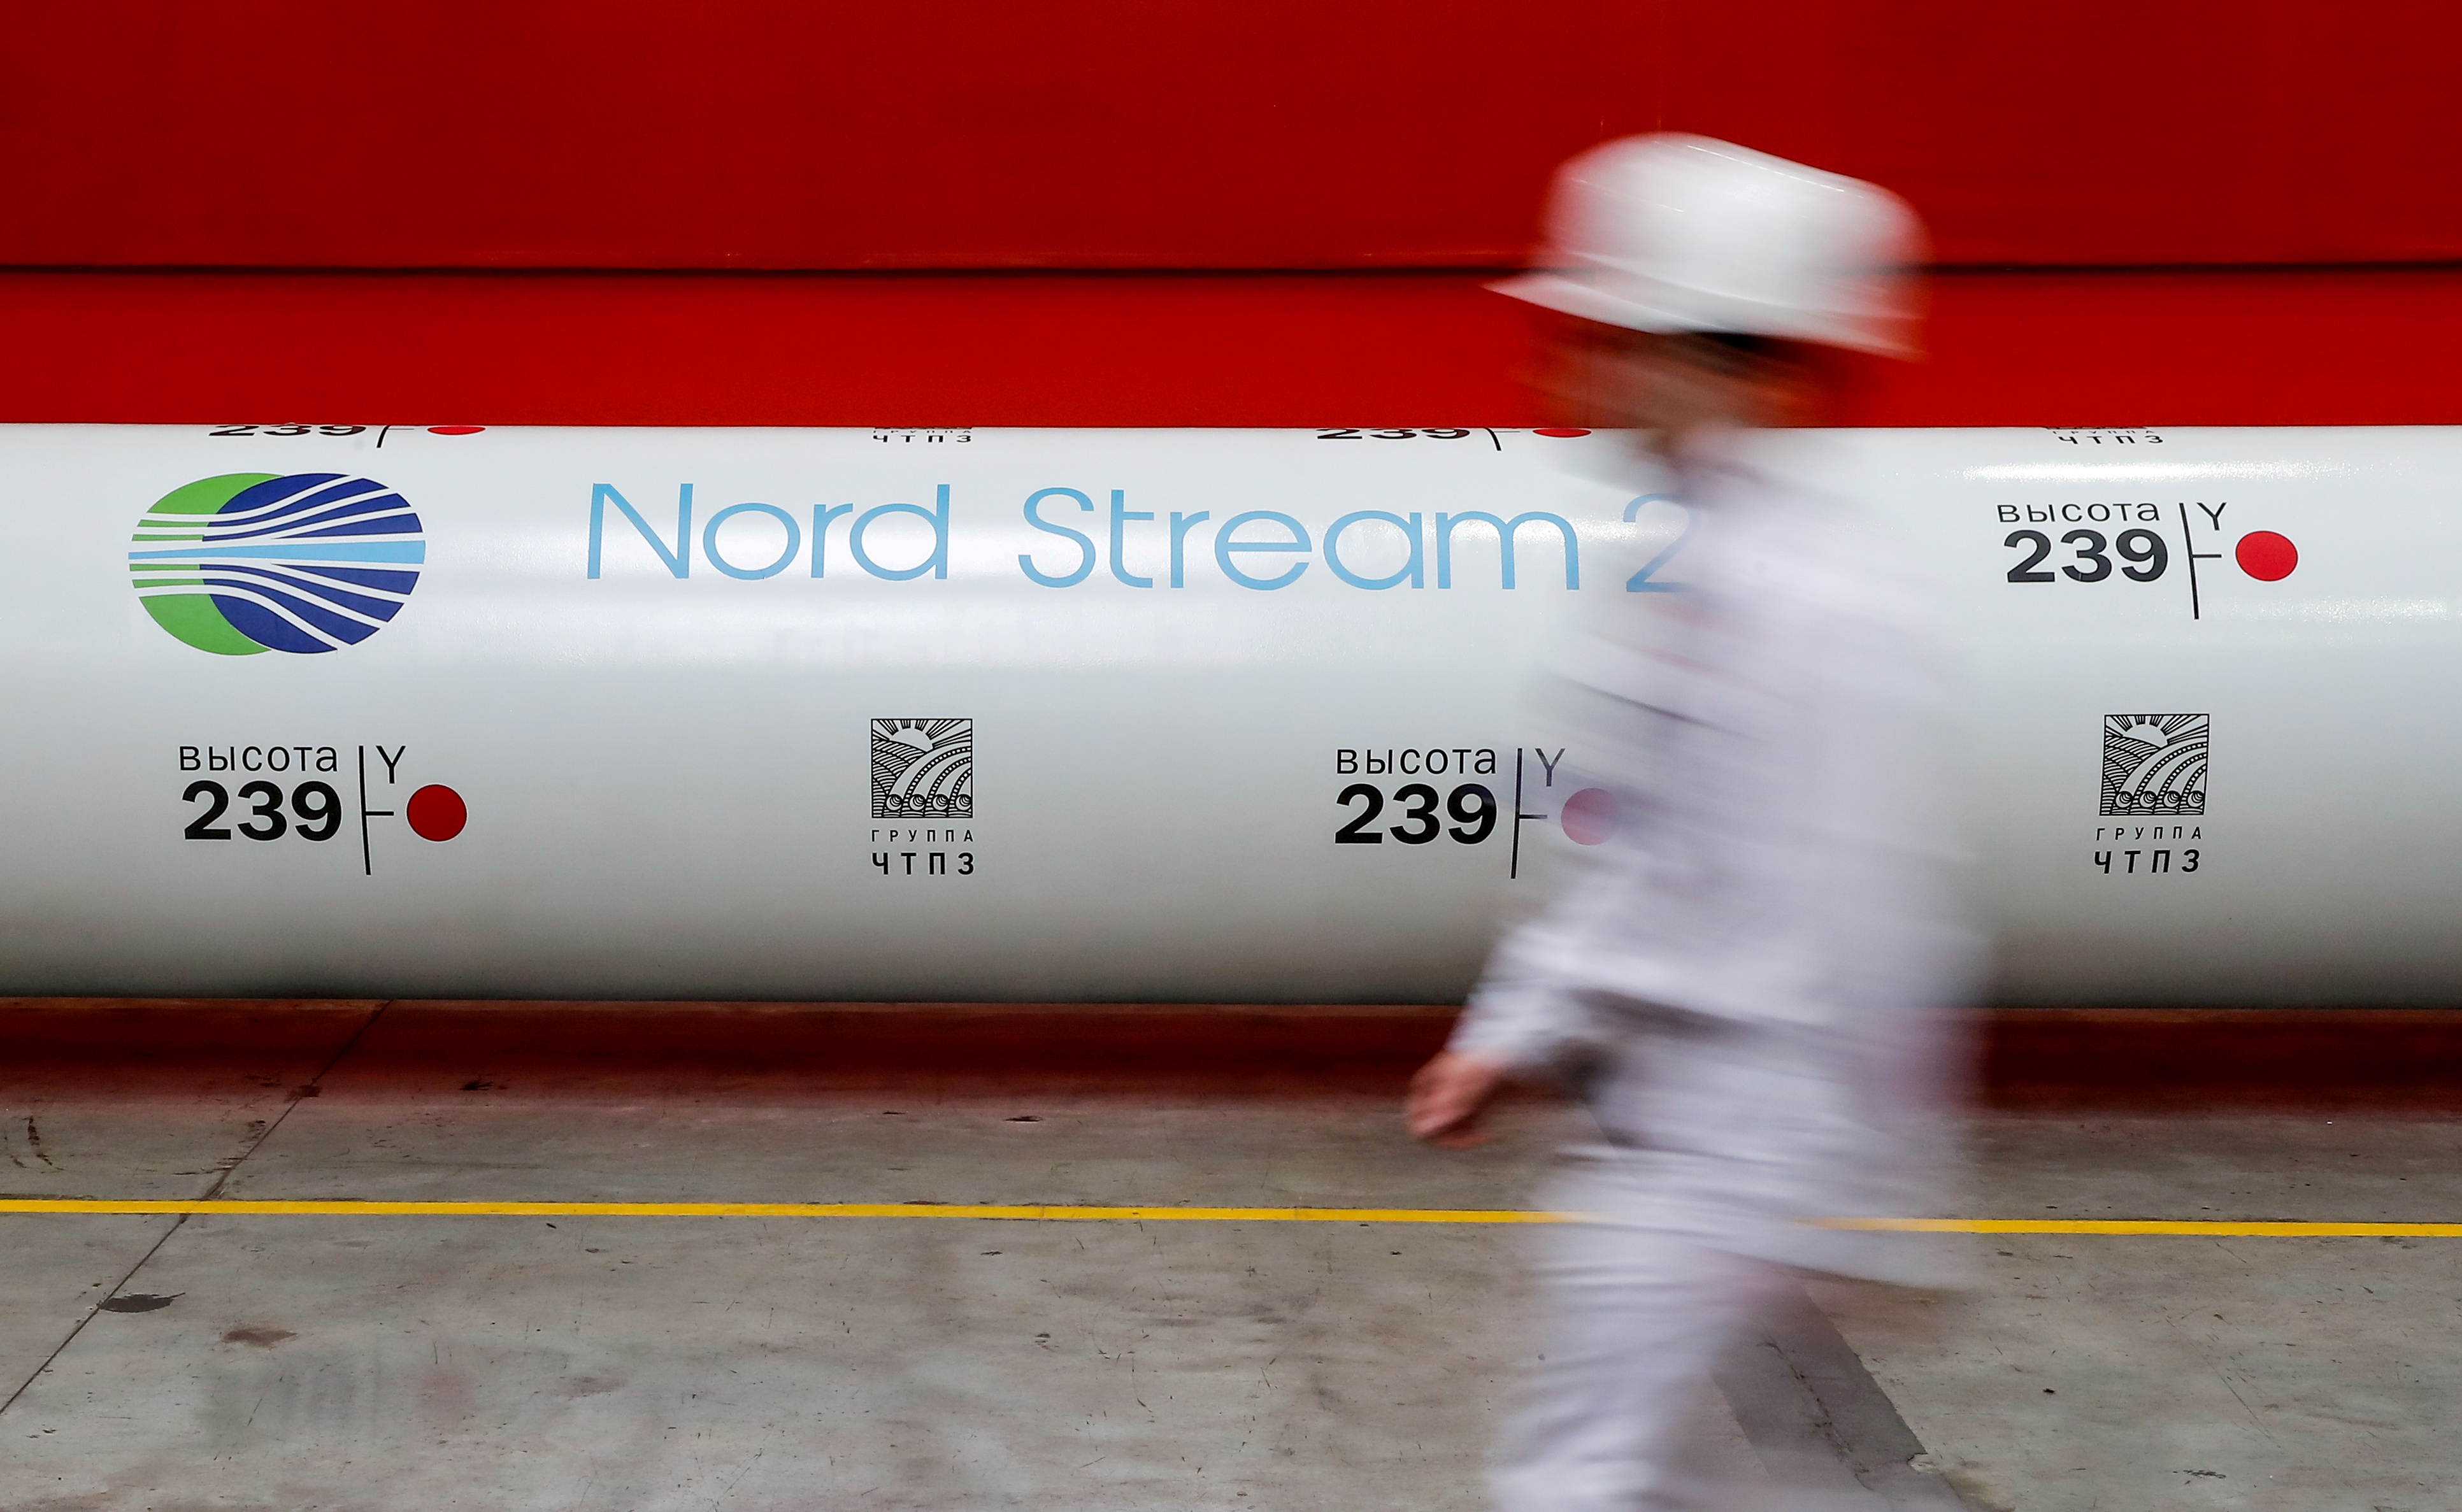 ILE PHOTO: The logo of the Nord Stream 2 gas pipeline project is seen on a pipe at the Chelyabinsk pipe rolling plant in Chelyabinsk, Russia